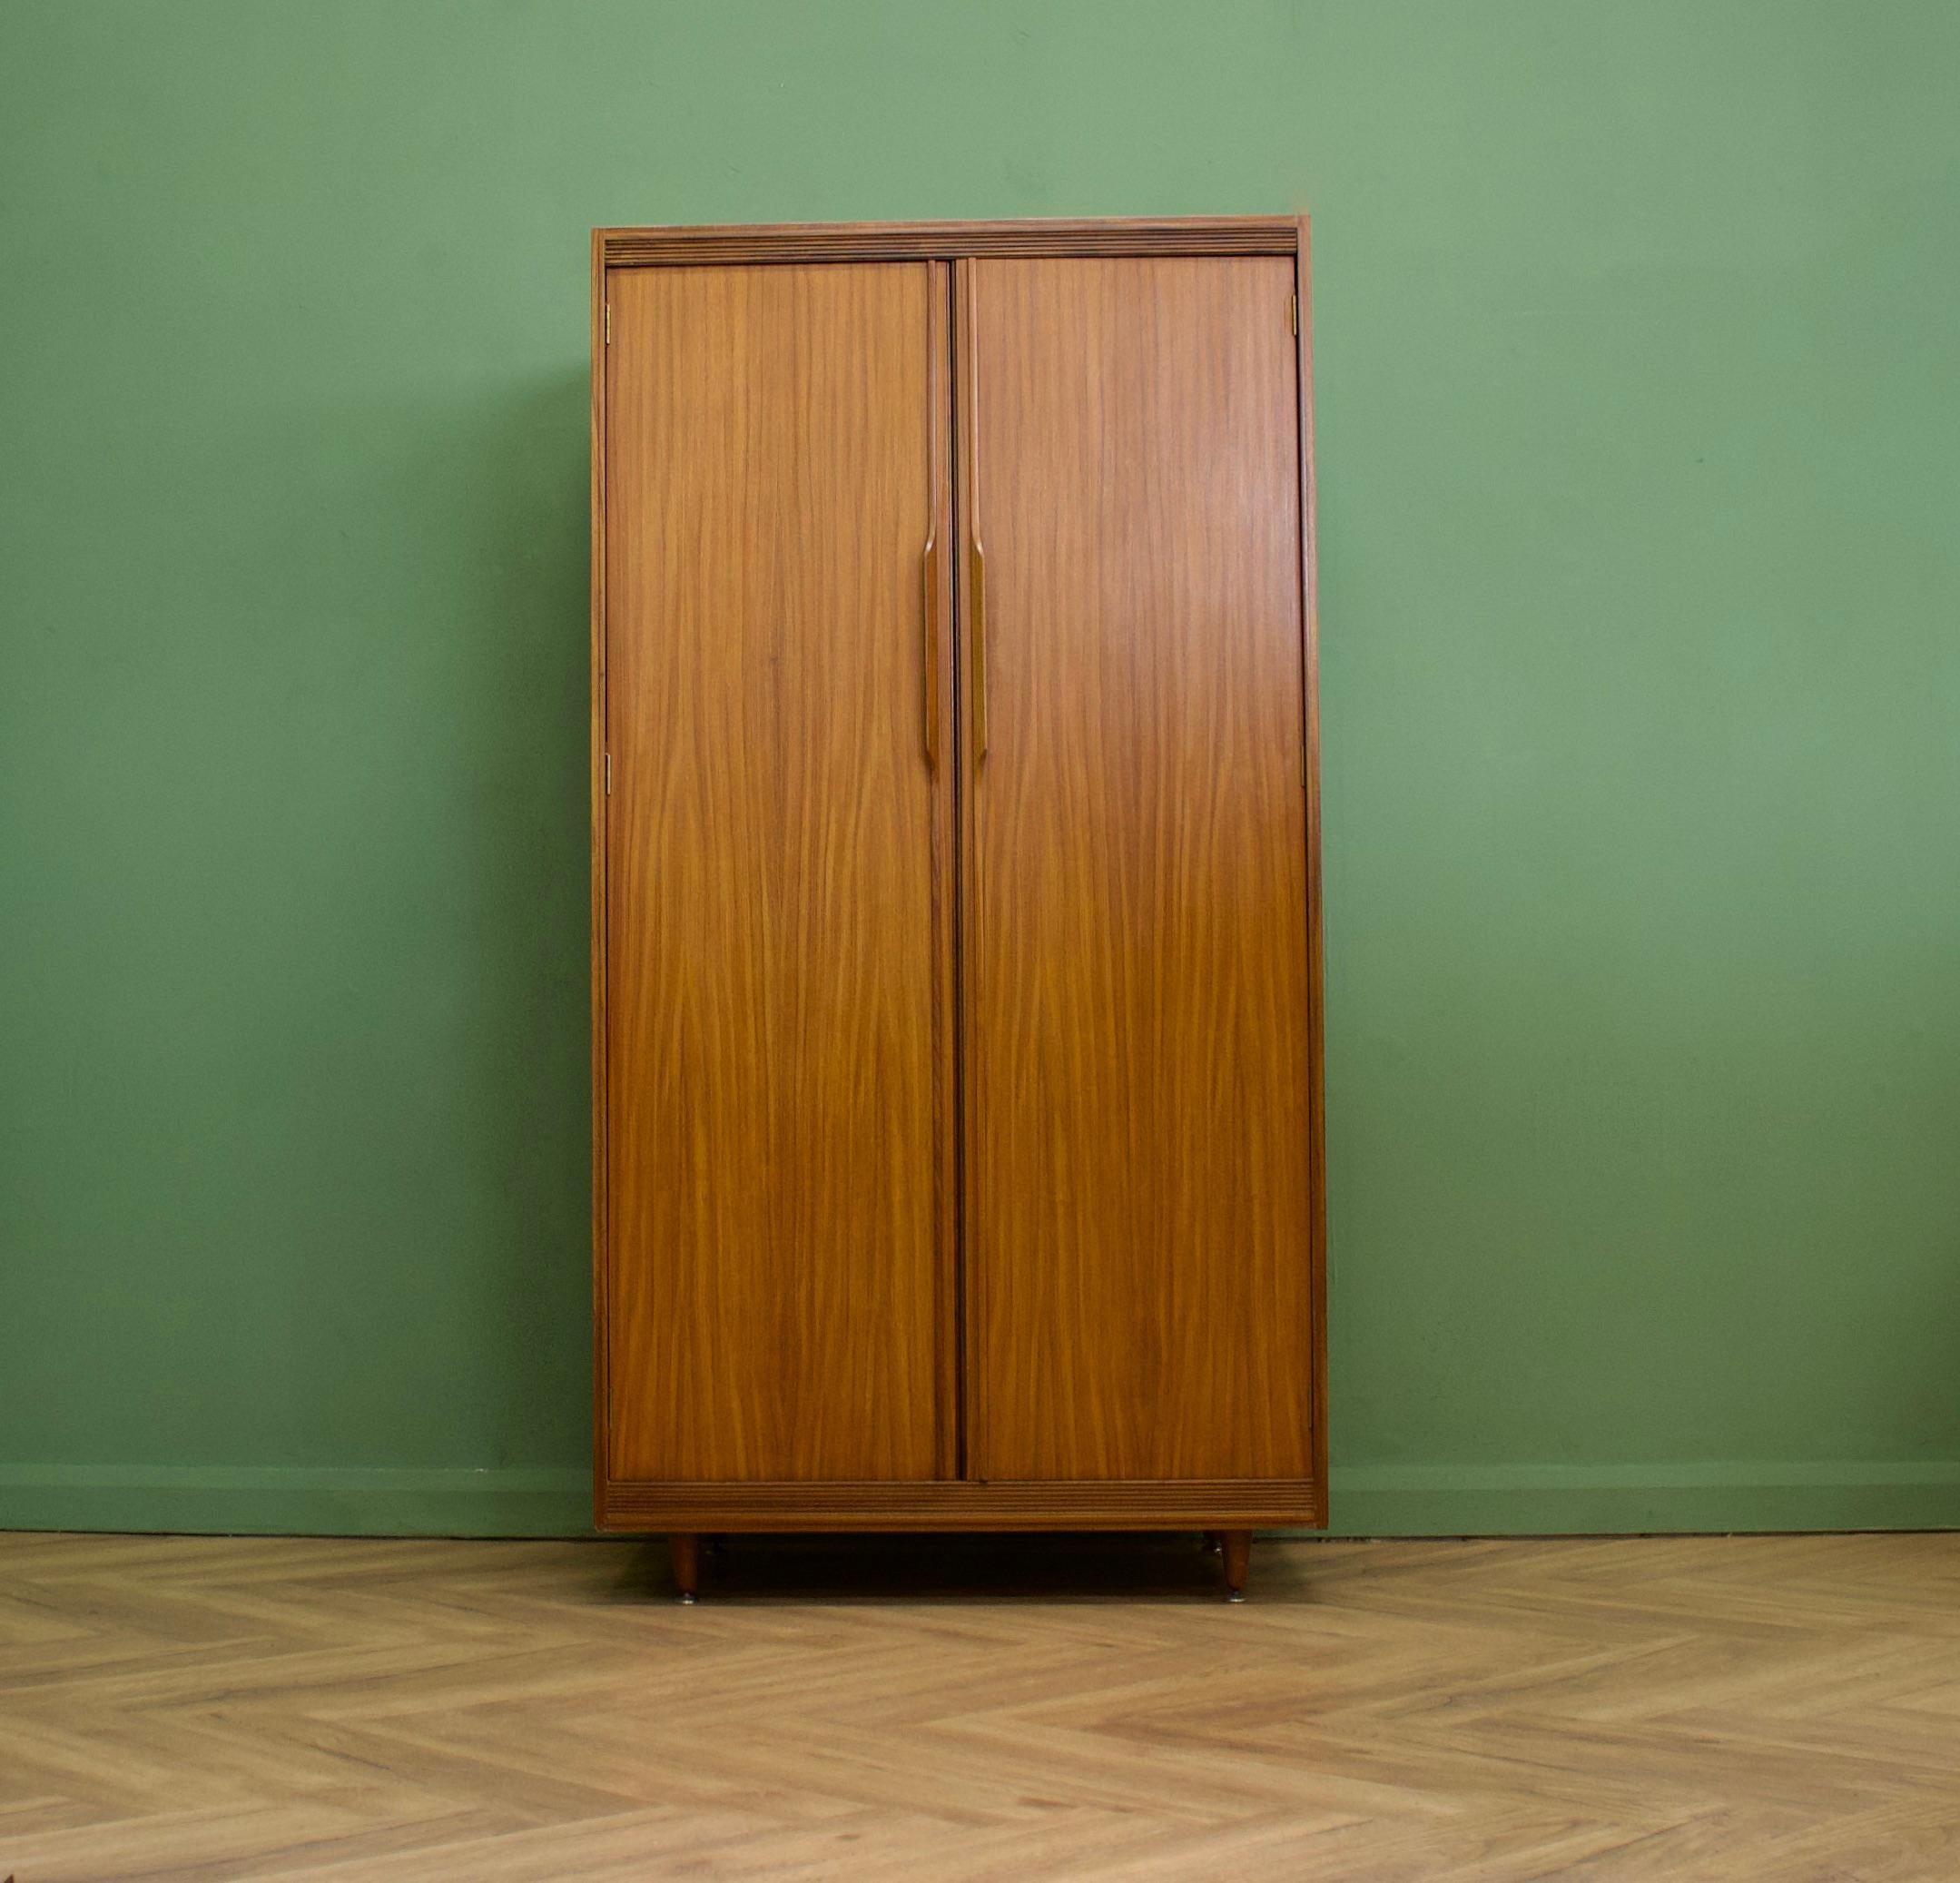 A freestanding double door teak wardrobe from White & Newton-  in the Danish modern style
Made during the 1960s


Fitted out with two clothes rails, drawers and fixed shelving for ample storage in such a compact piece
The style of this wardrobe is